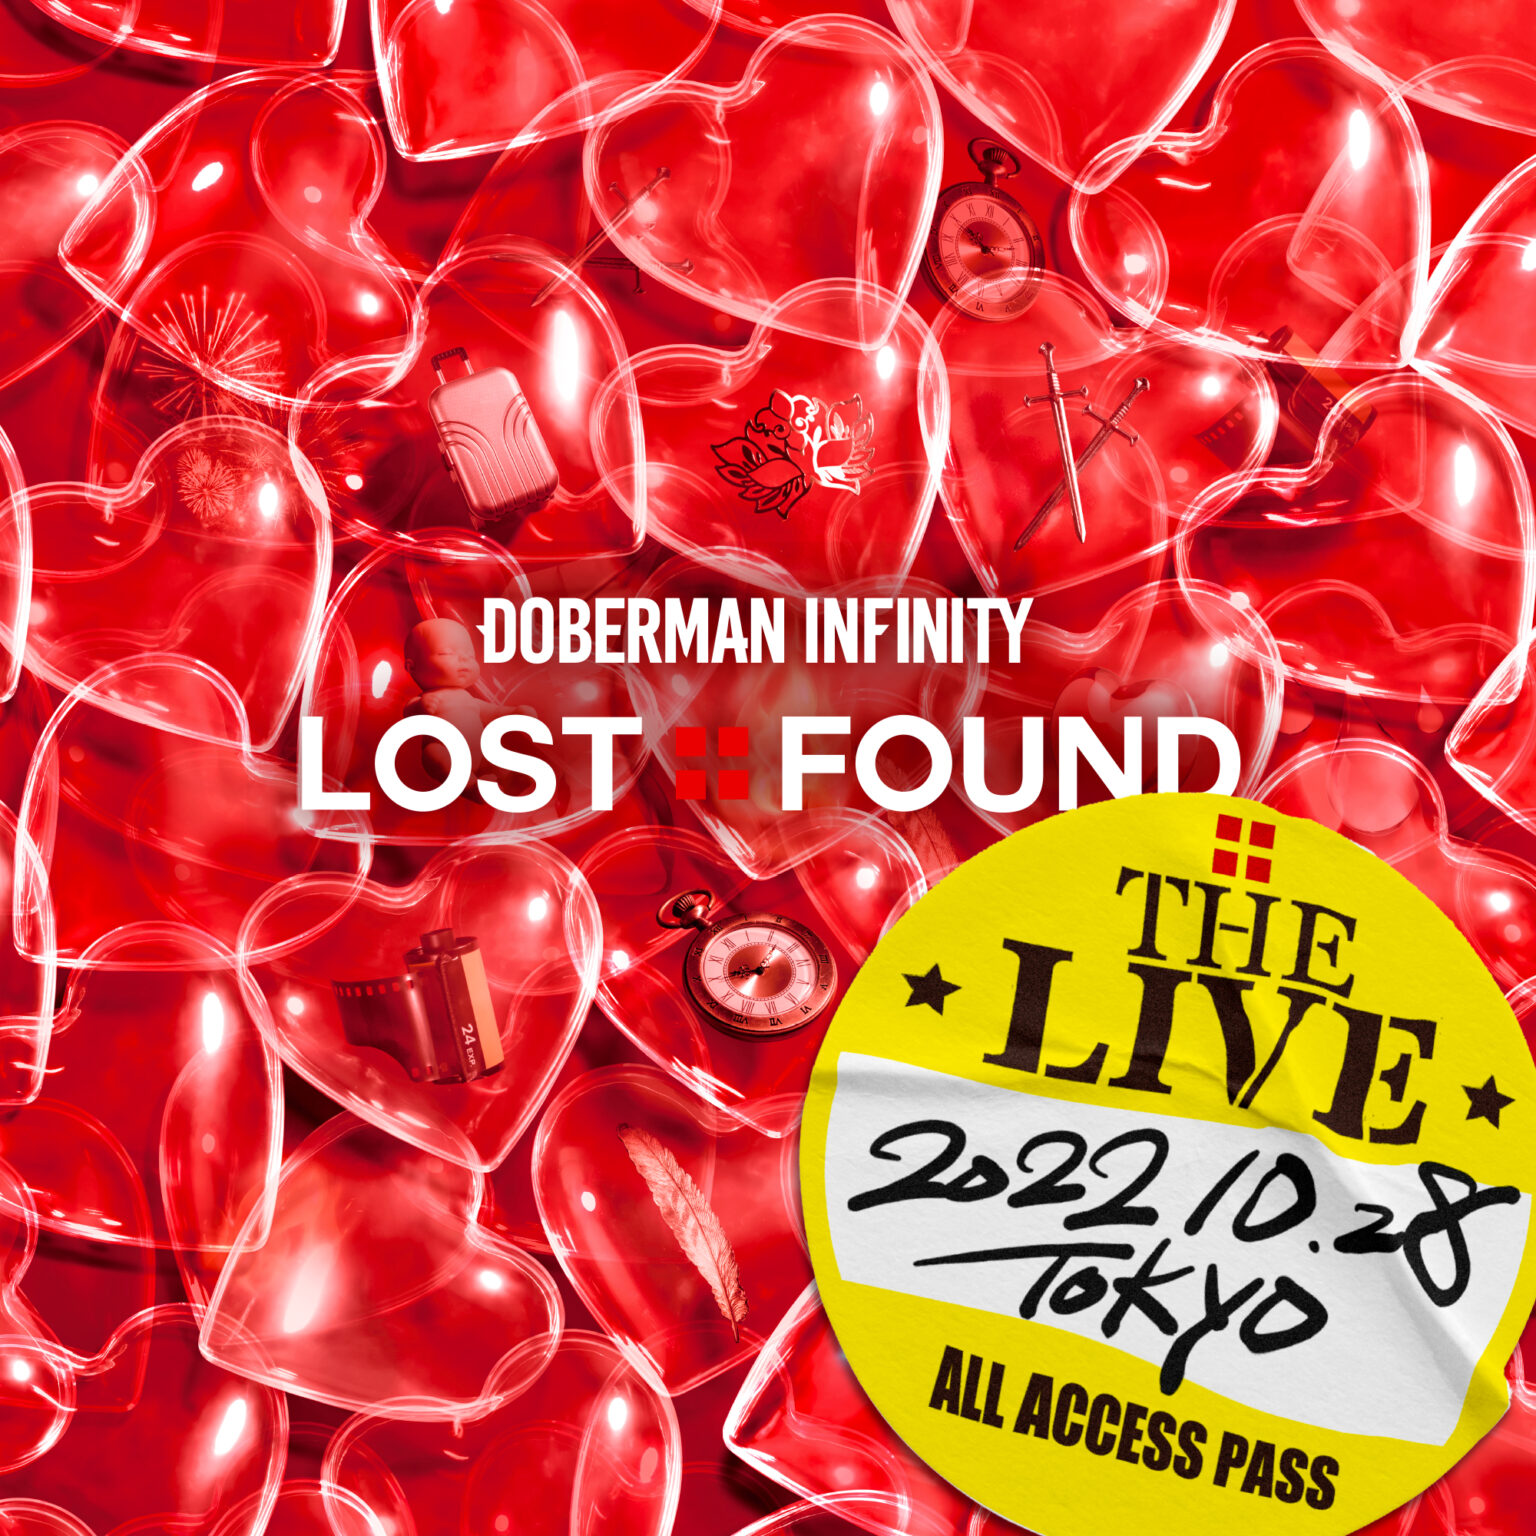 「LOST+FOUND “THE LIVE“」初のLIVE音源配信 (2022年10月28日東京公演LIVE音源)